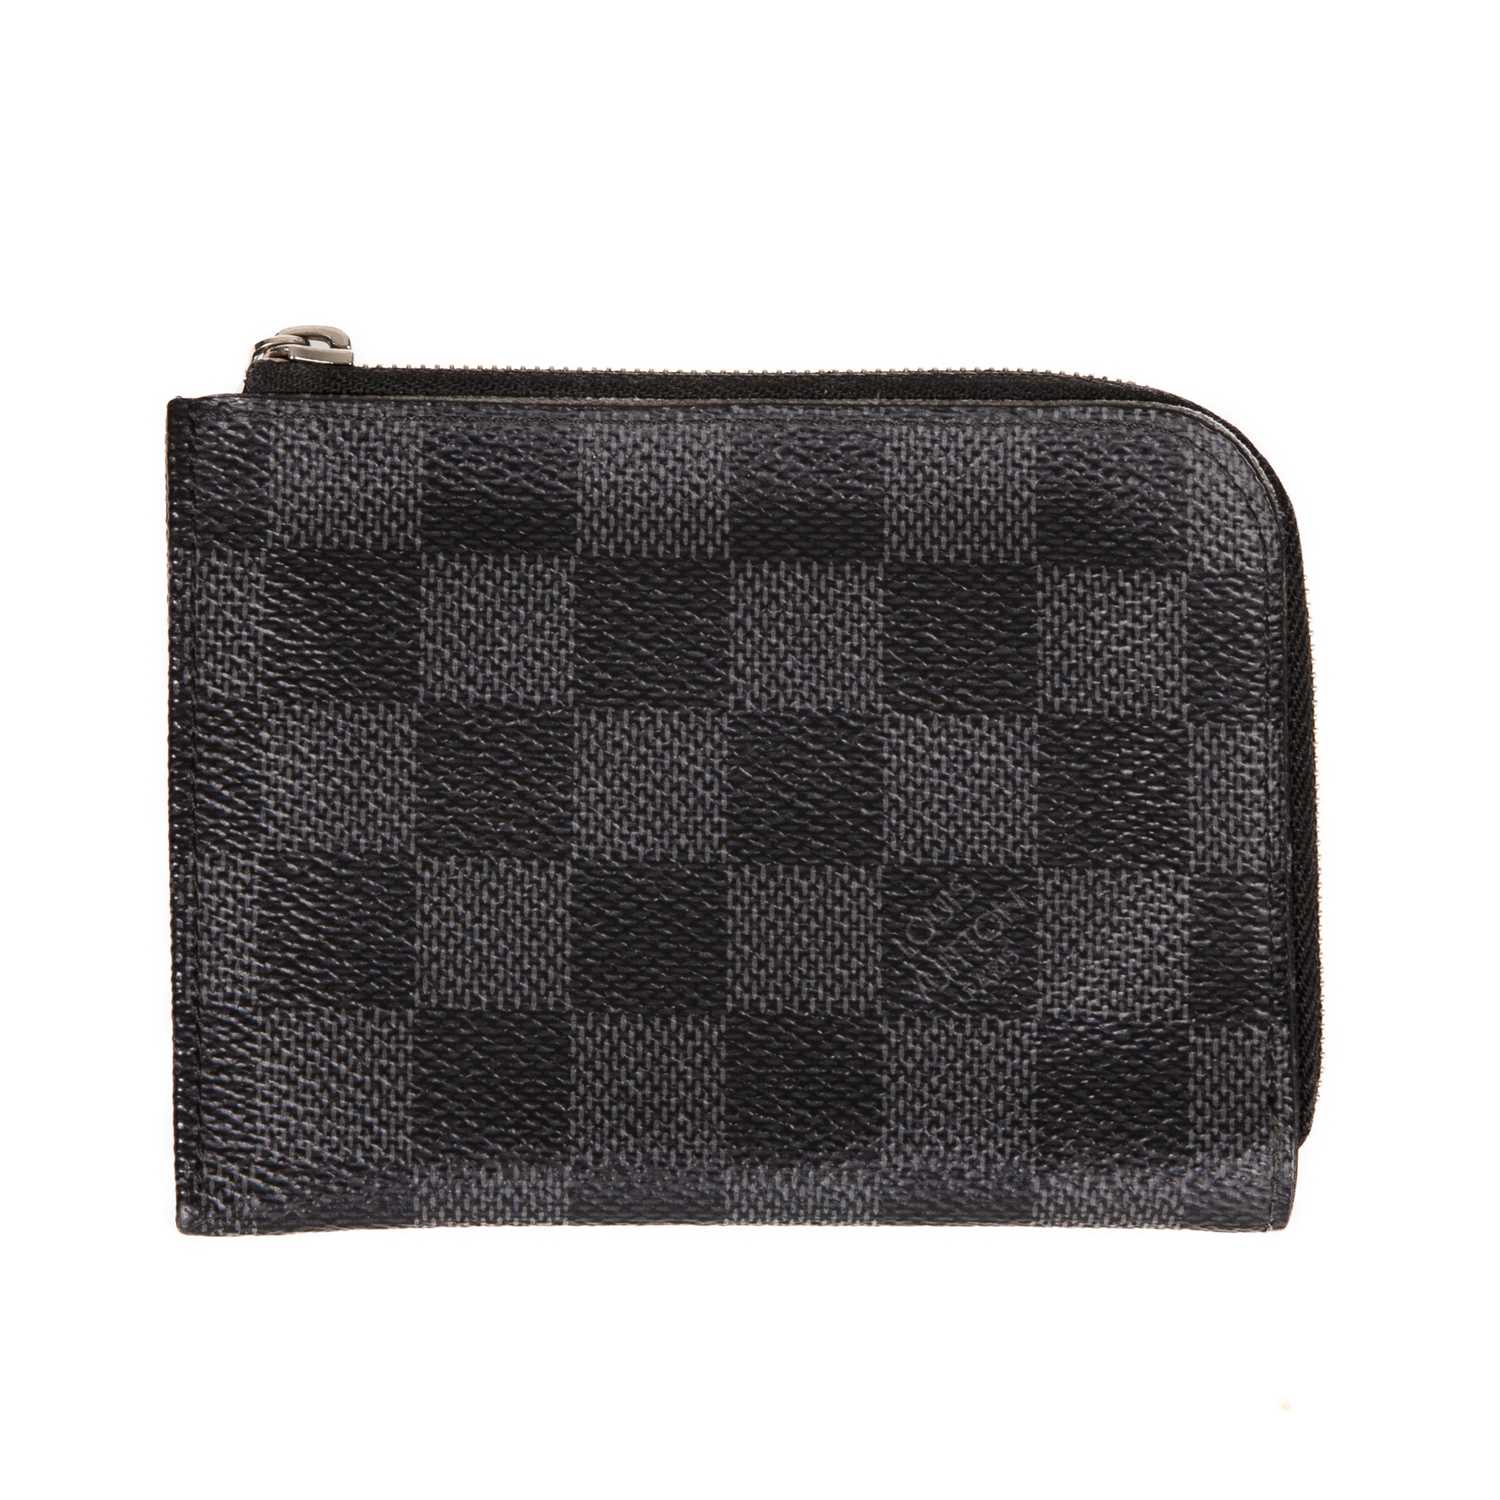 Louis Vuitton, a damier graphite compact zippy wallet, crafted from the maker's check coated